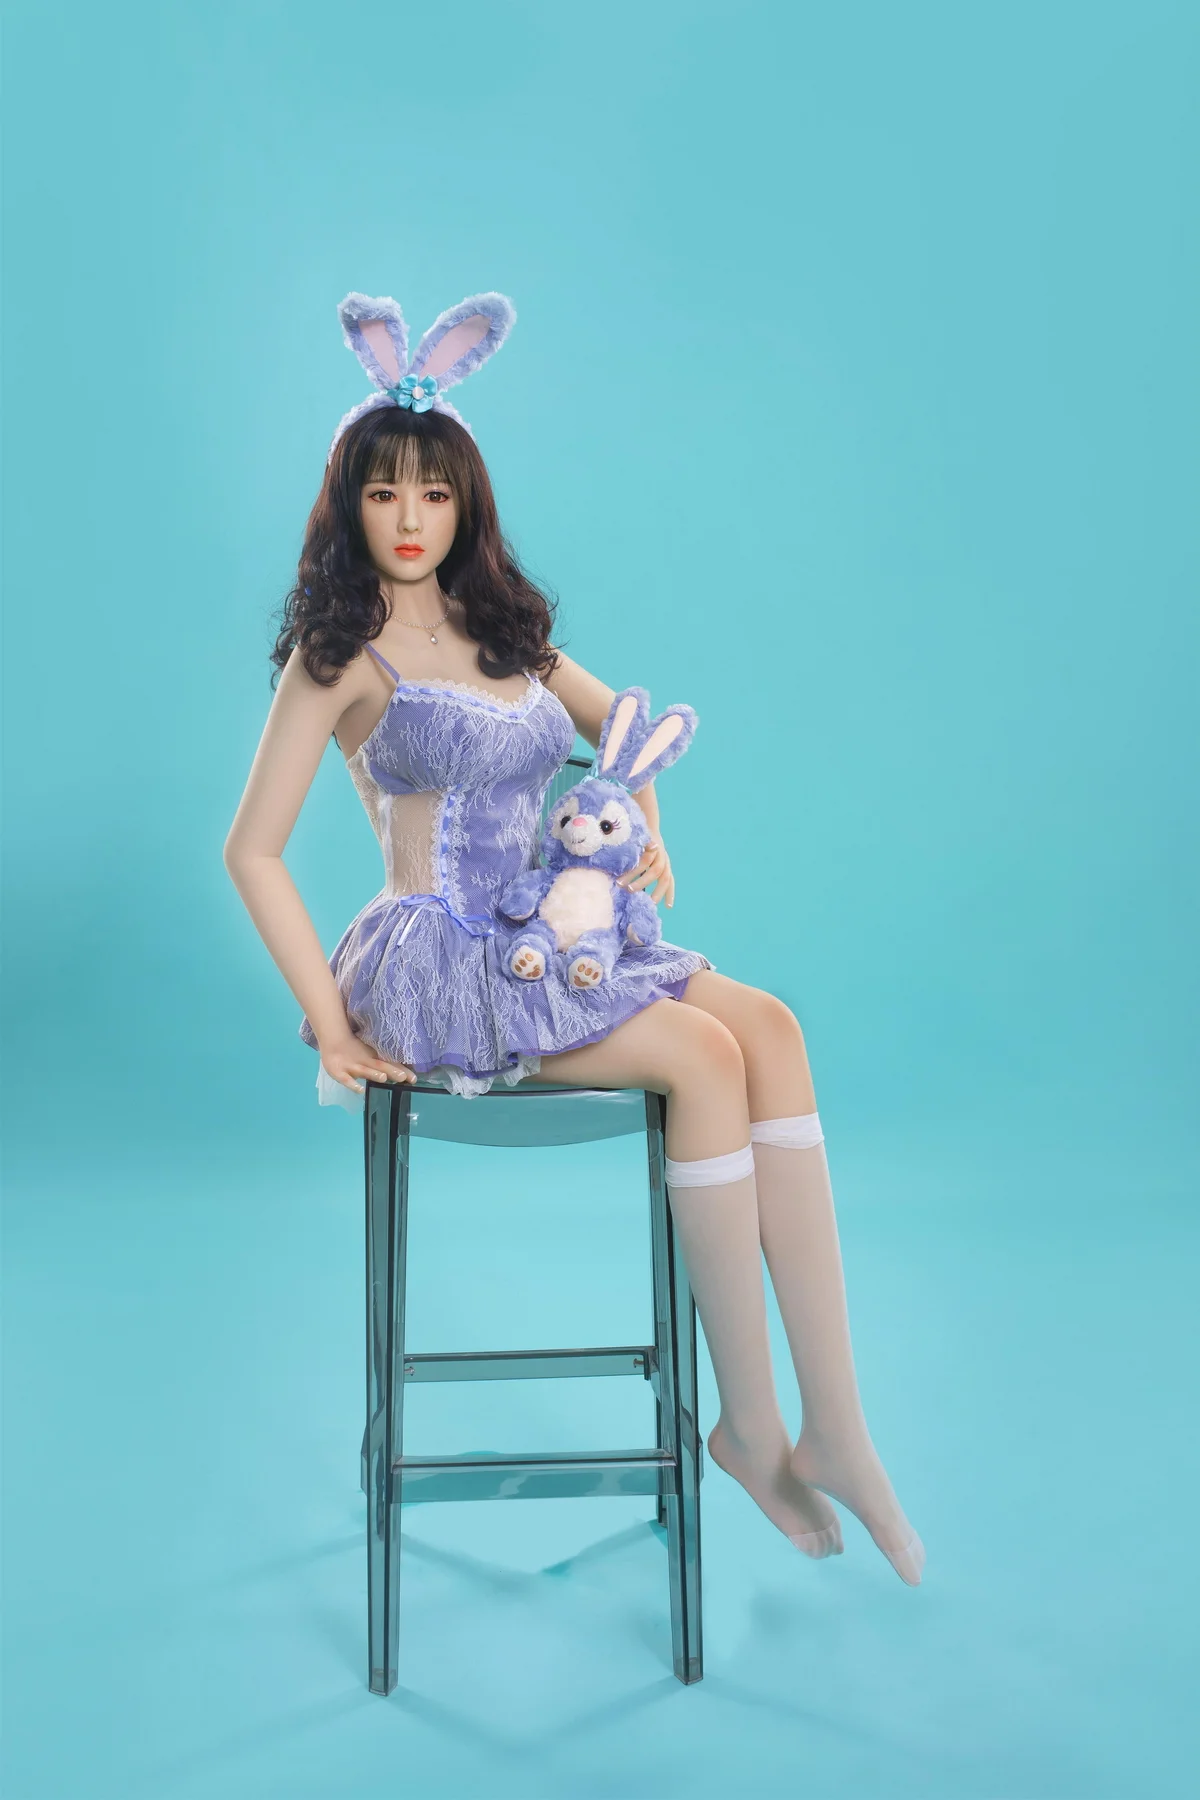 young bunny girl sex doll sitting on stool